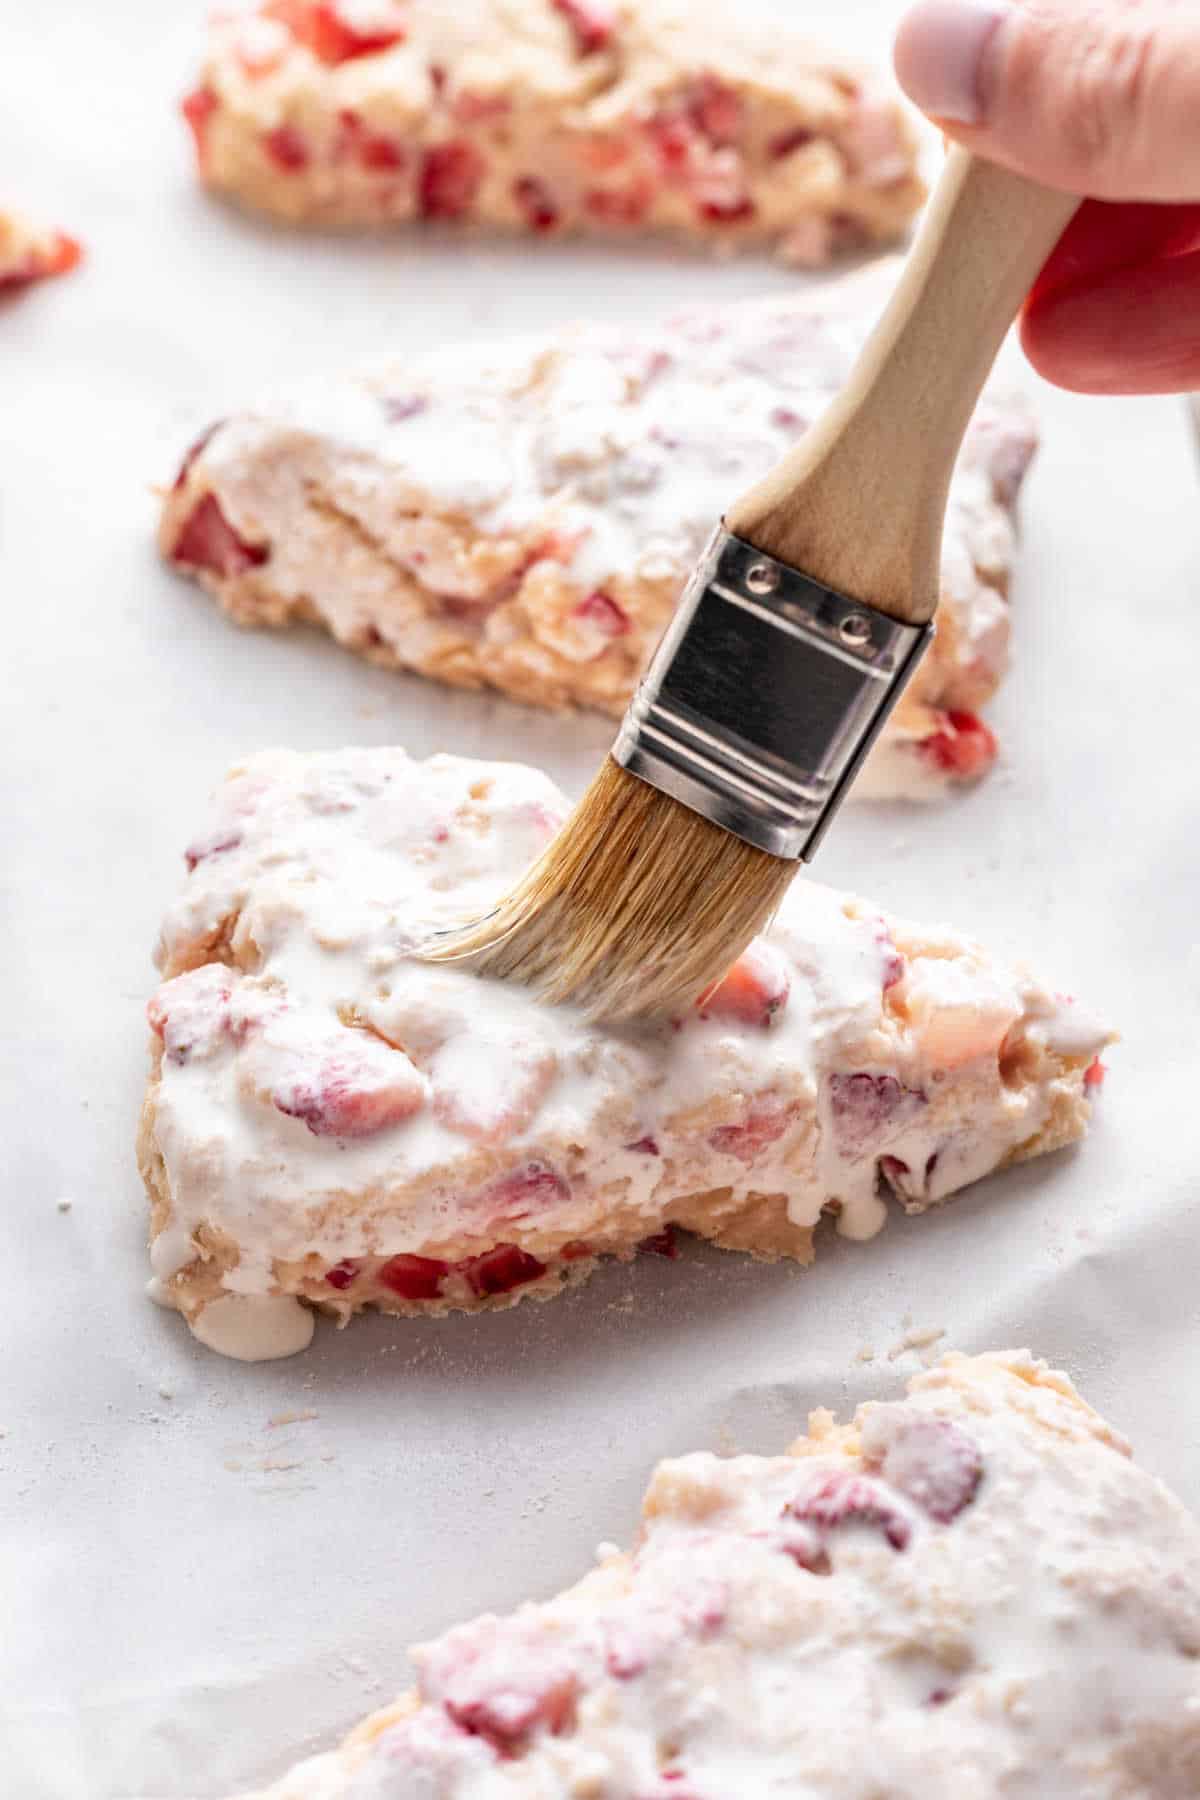 A pastry brush brushing cream onto an unbaked strawberry scone.